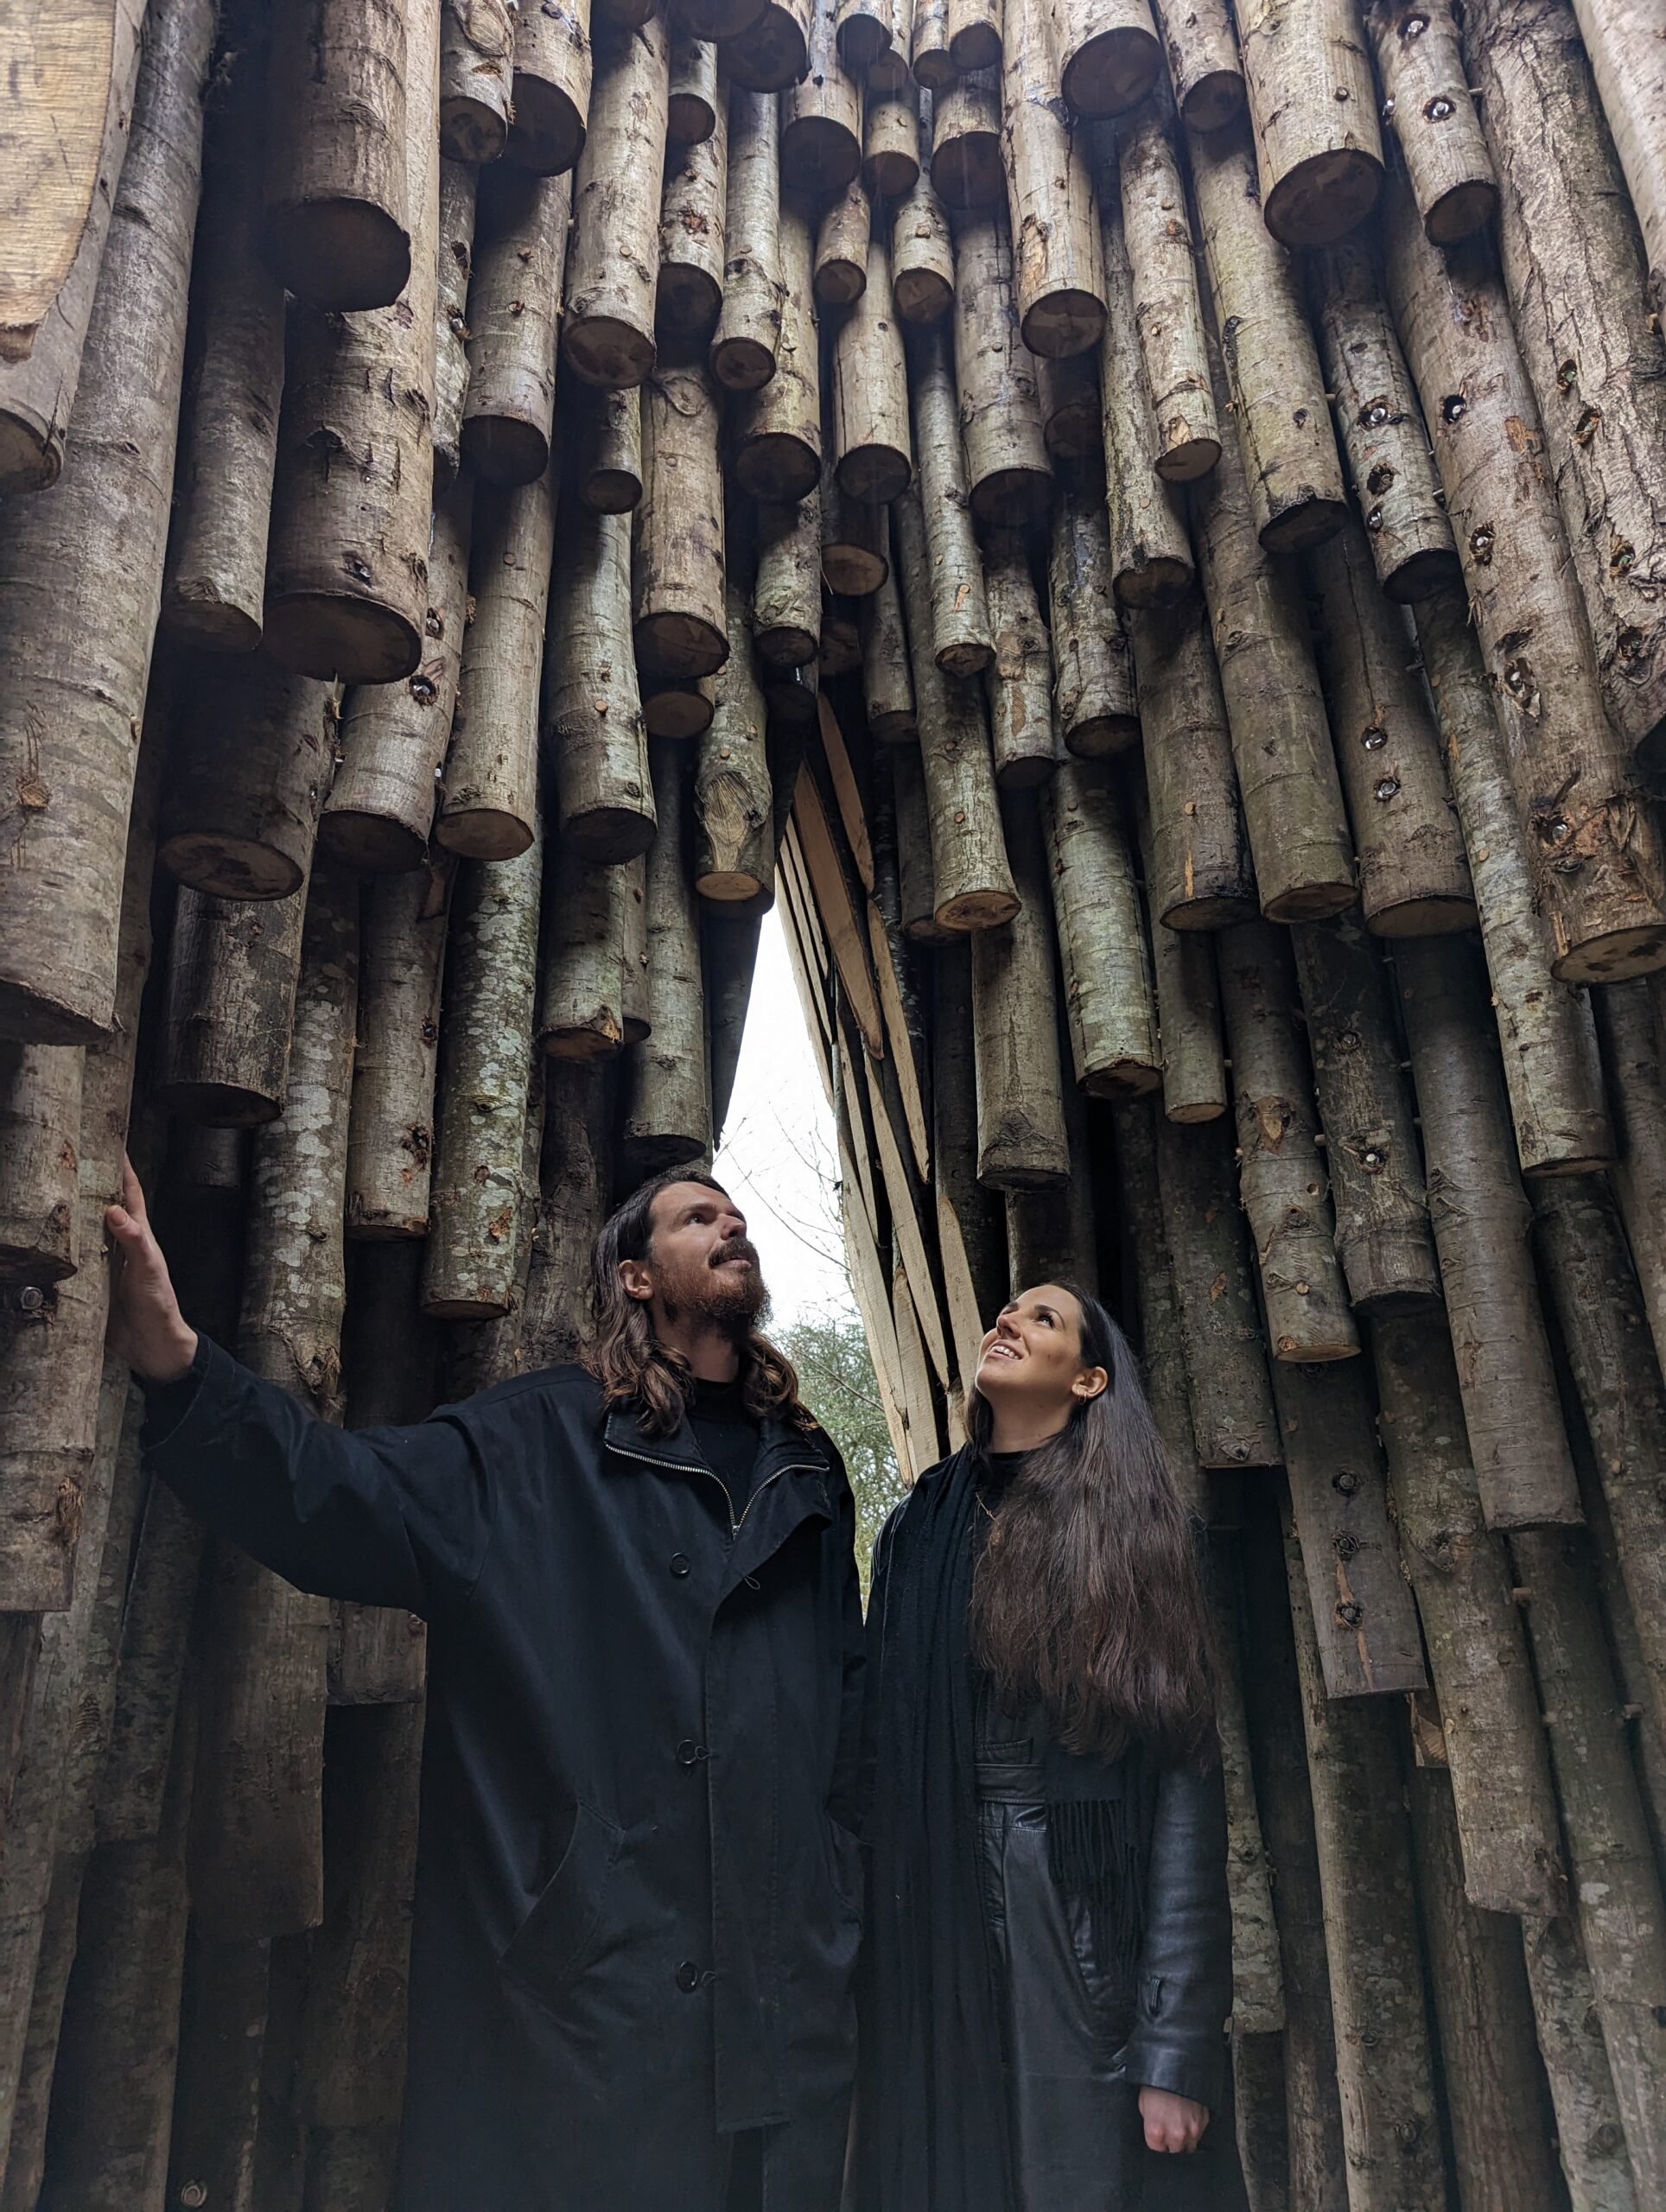 Artists Matthijs and Simone standing inside the wooden coppiced shelter gazing up to the sky